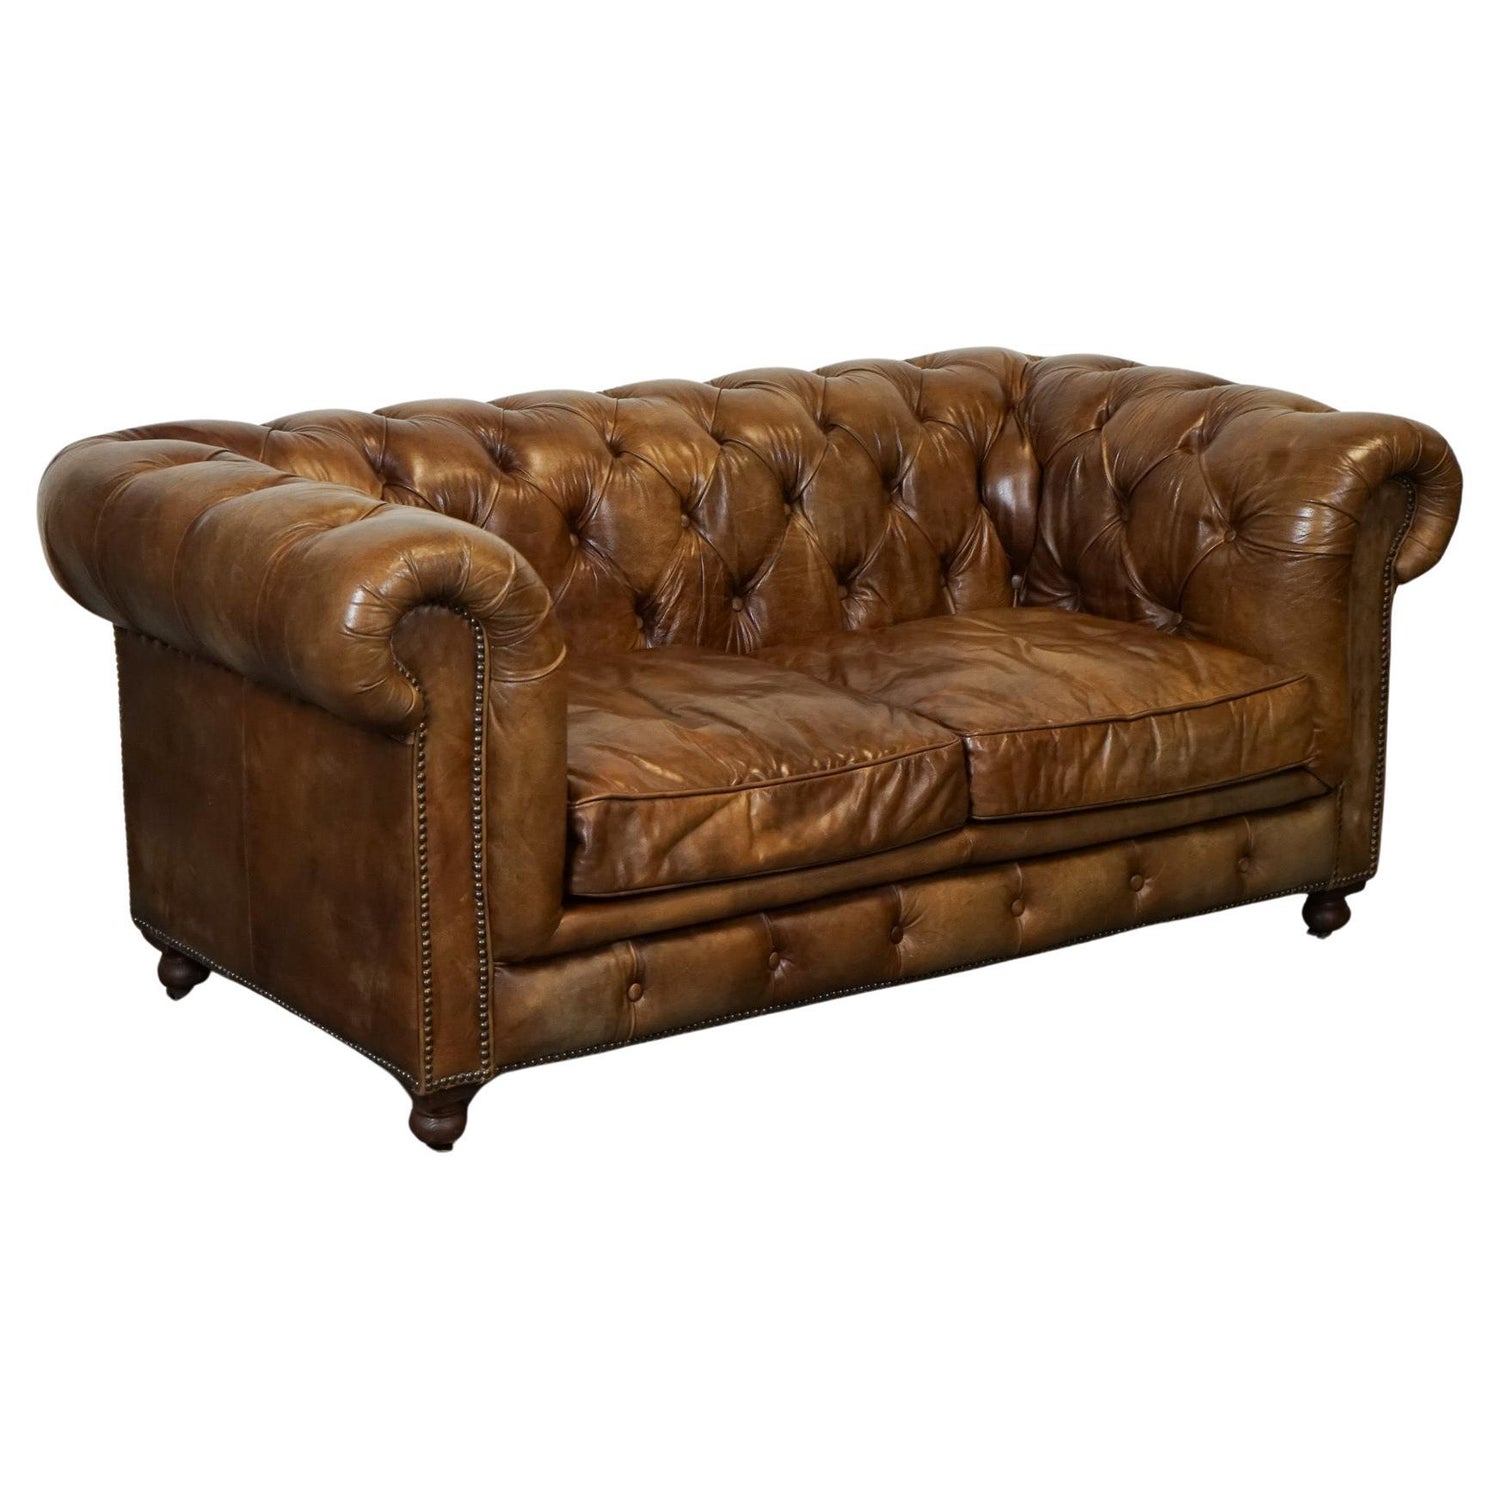 Timothy Oulton Feather Sofa in Old Saddle Black Leather